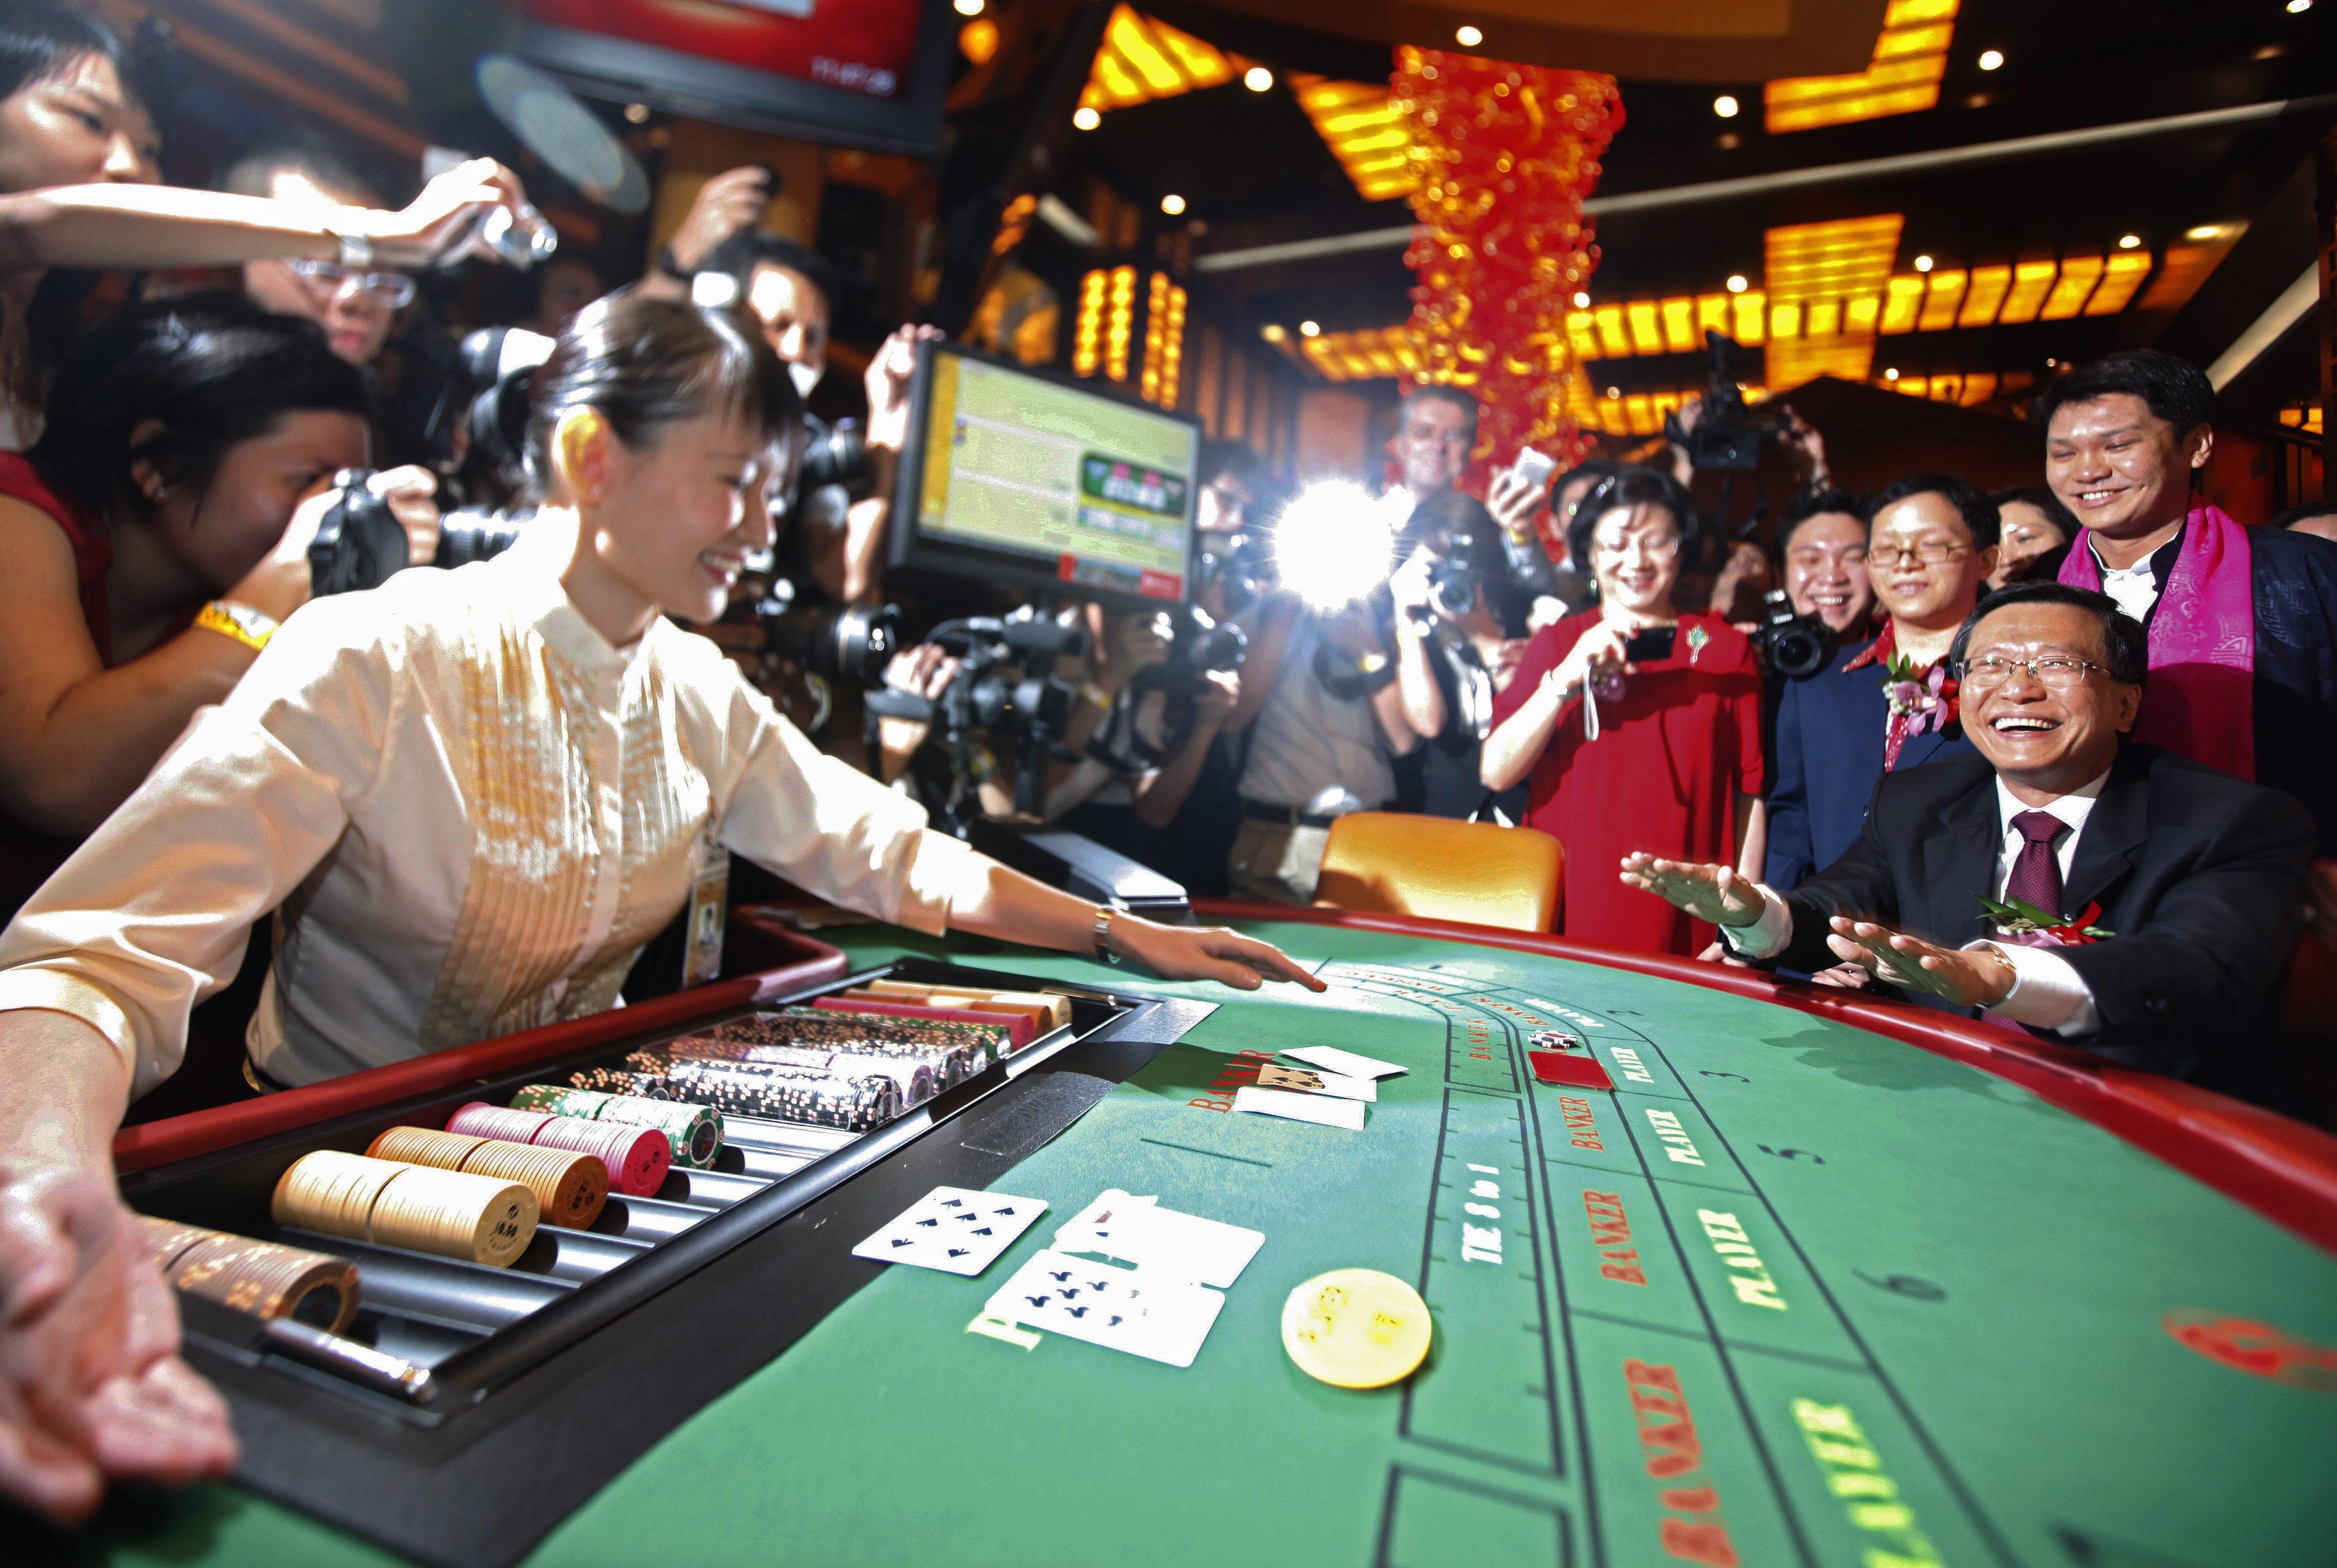 Chairman of Resorts World Sentosa and its developer, Malaysia’s Genting Group Lim Kok Thay plays baccarat to begin the soft opening of Singapore’s first casino in 2010. Photo: EPA-EFE